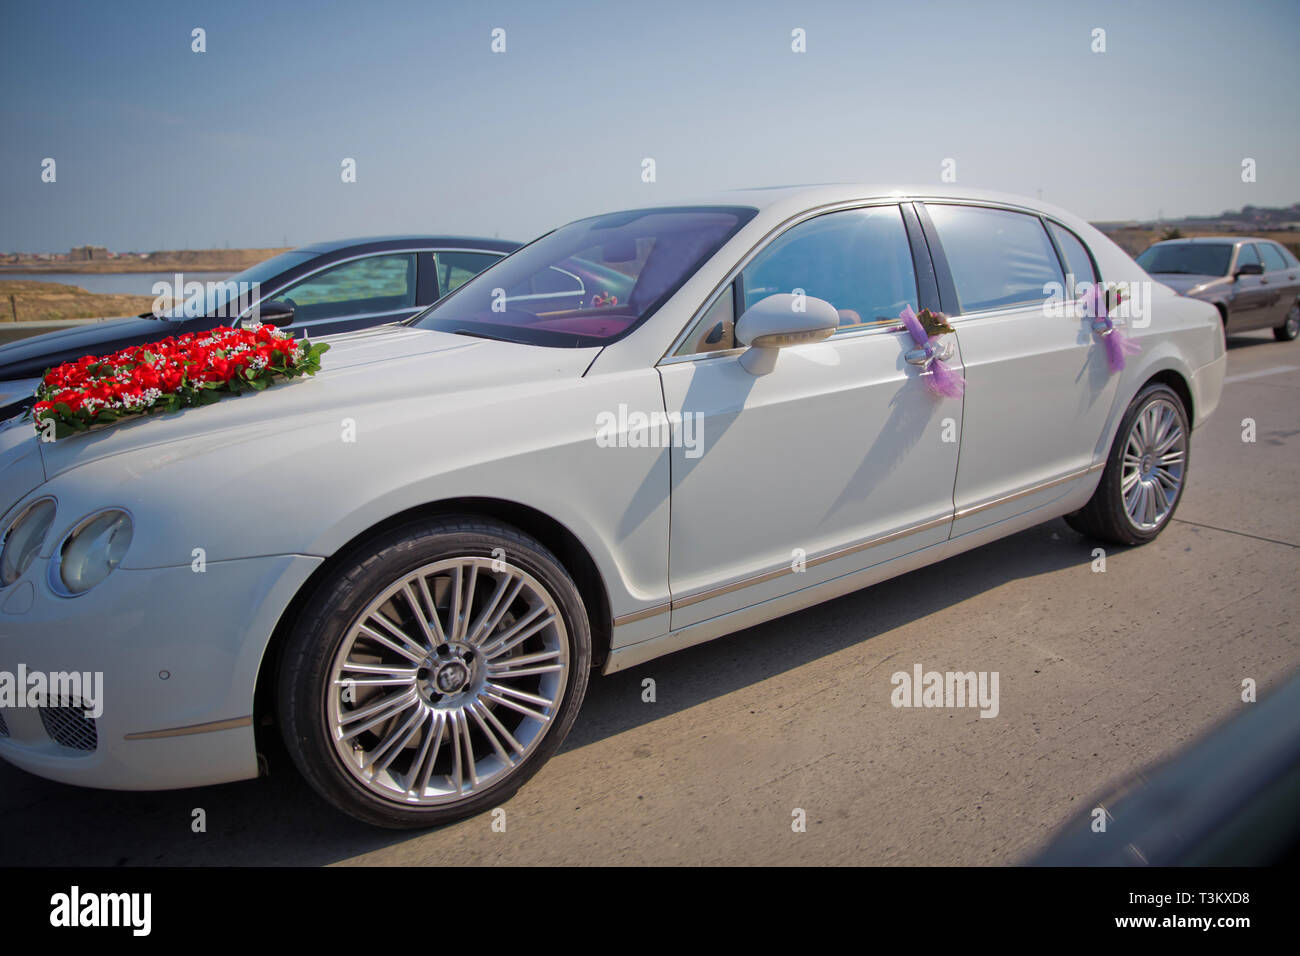 Closeup image of wedding car decoration with red and white flowers